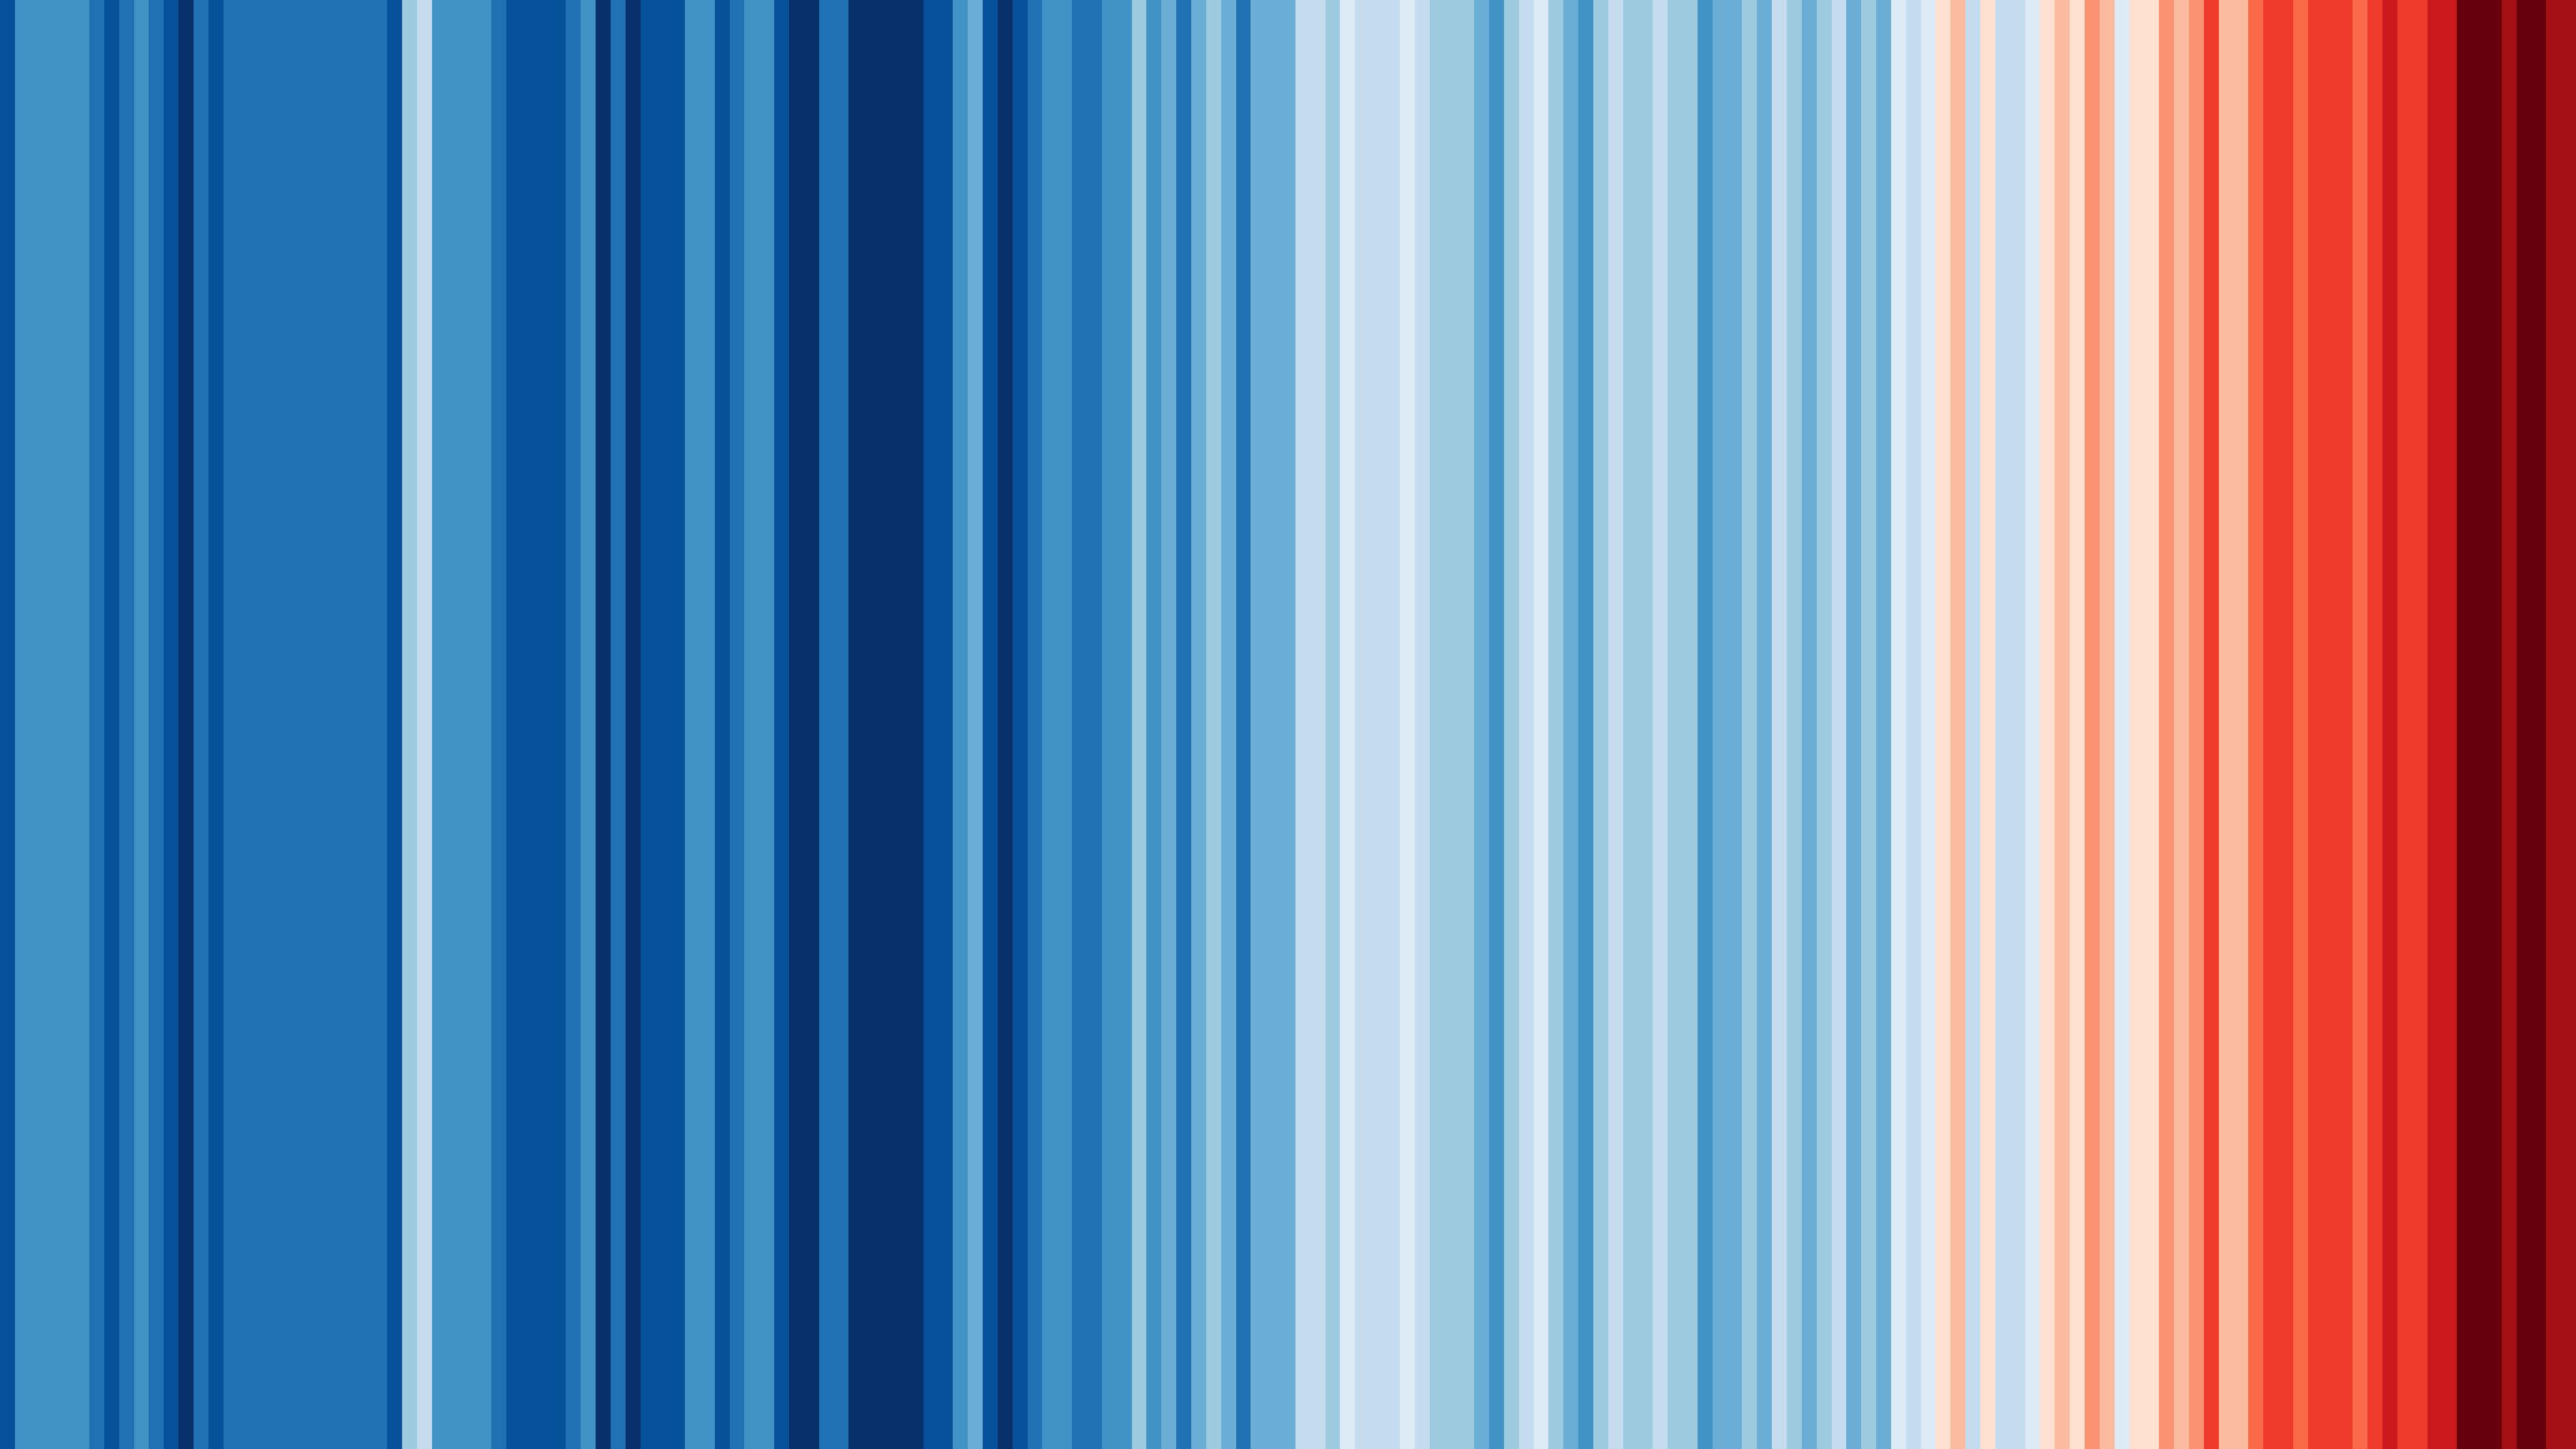 Climate Stripes by Professor Ed Hawkins (University of Reading)